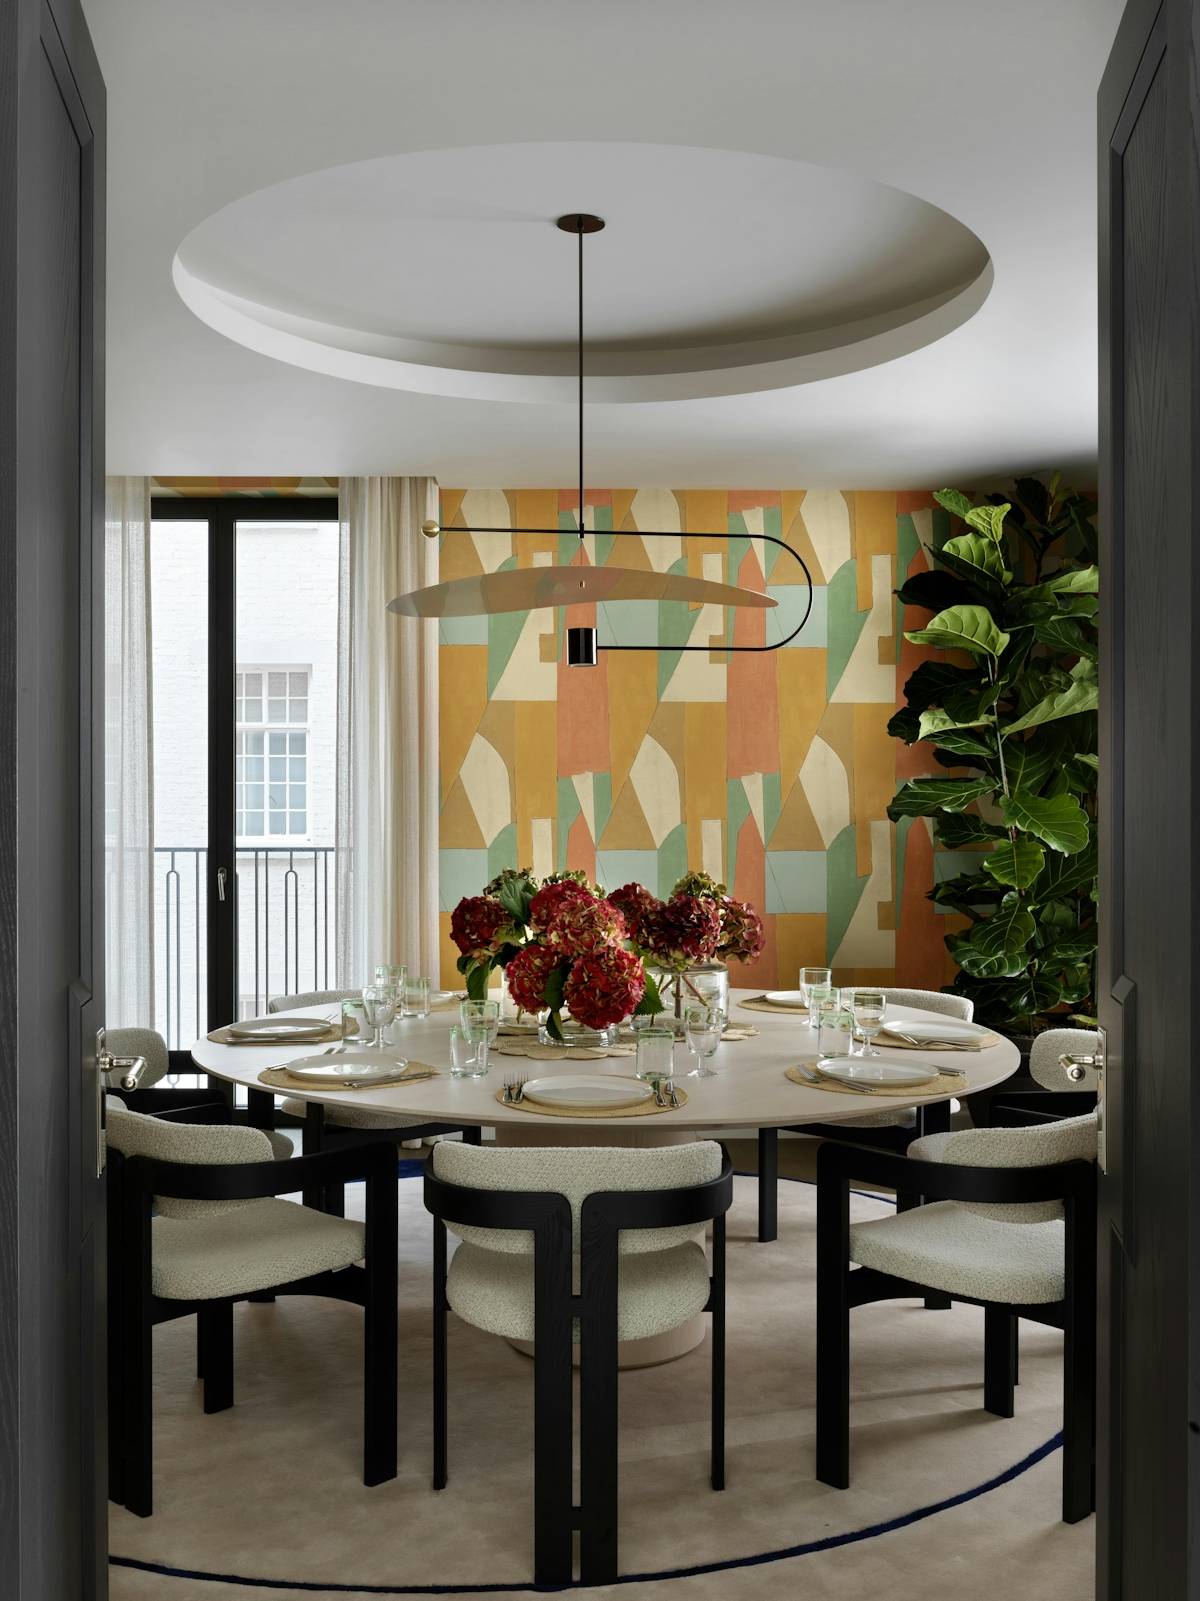 Dining Room by Finchatton | LuxDeco.com